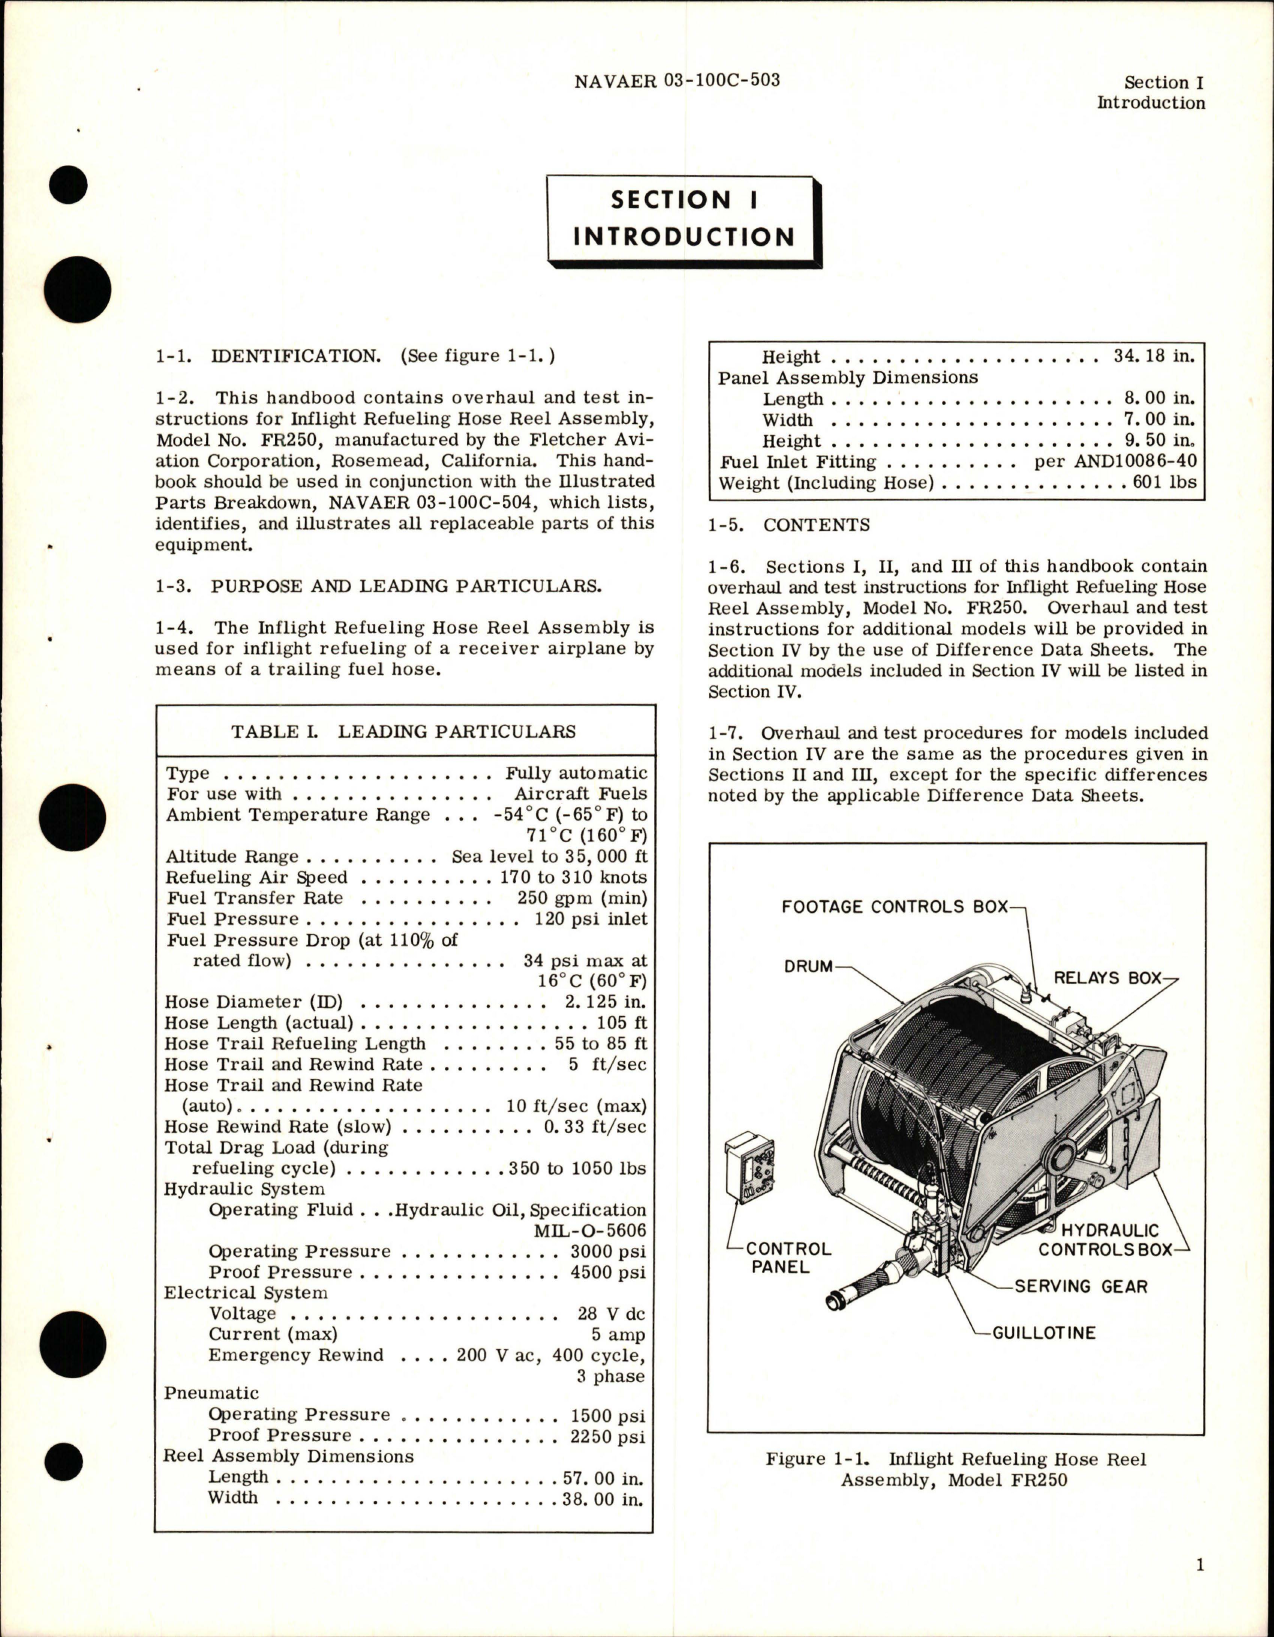 Sample page 5 from AirCorps Library document: Overhaul Instructions for Inflight Refueling Hose Reel Assembly - Model FR250